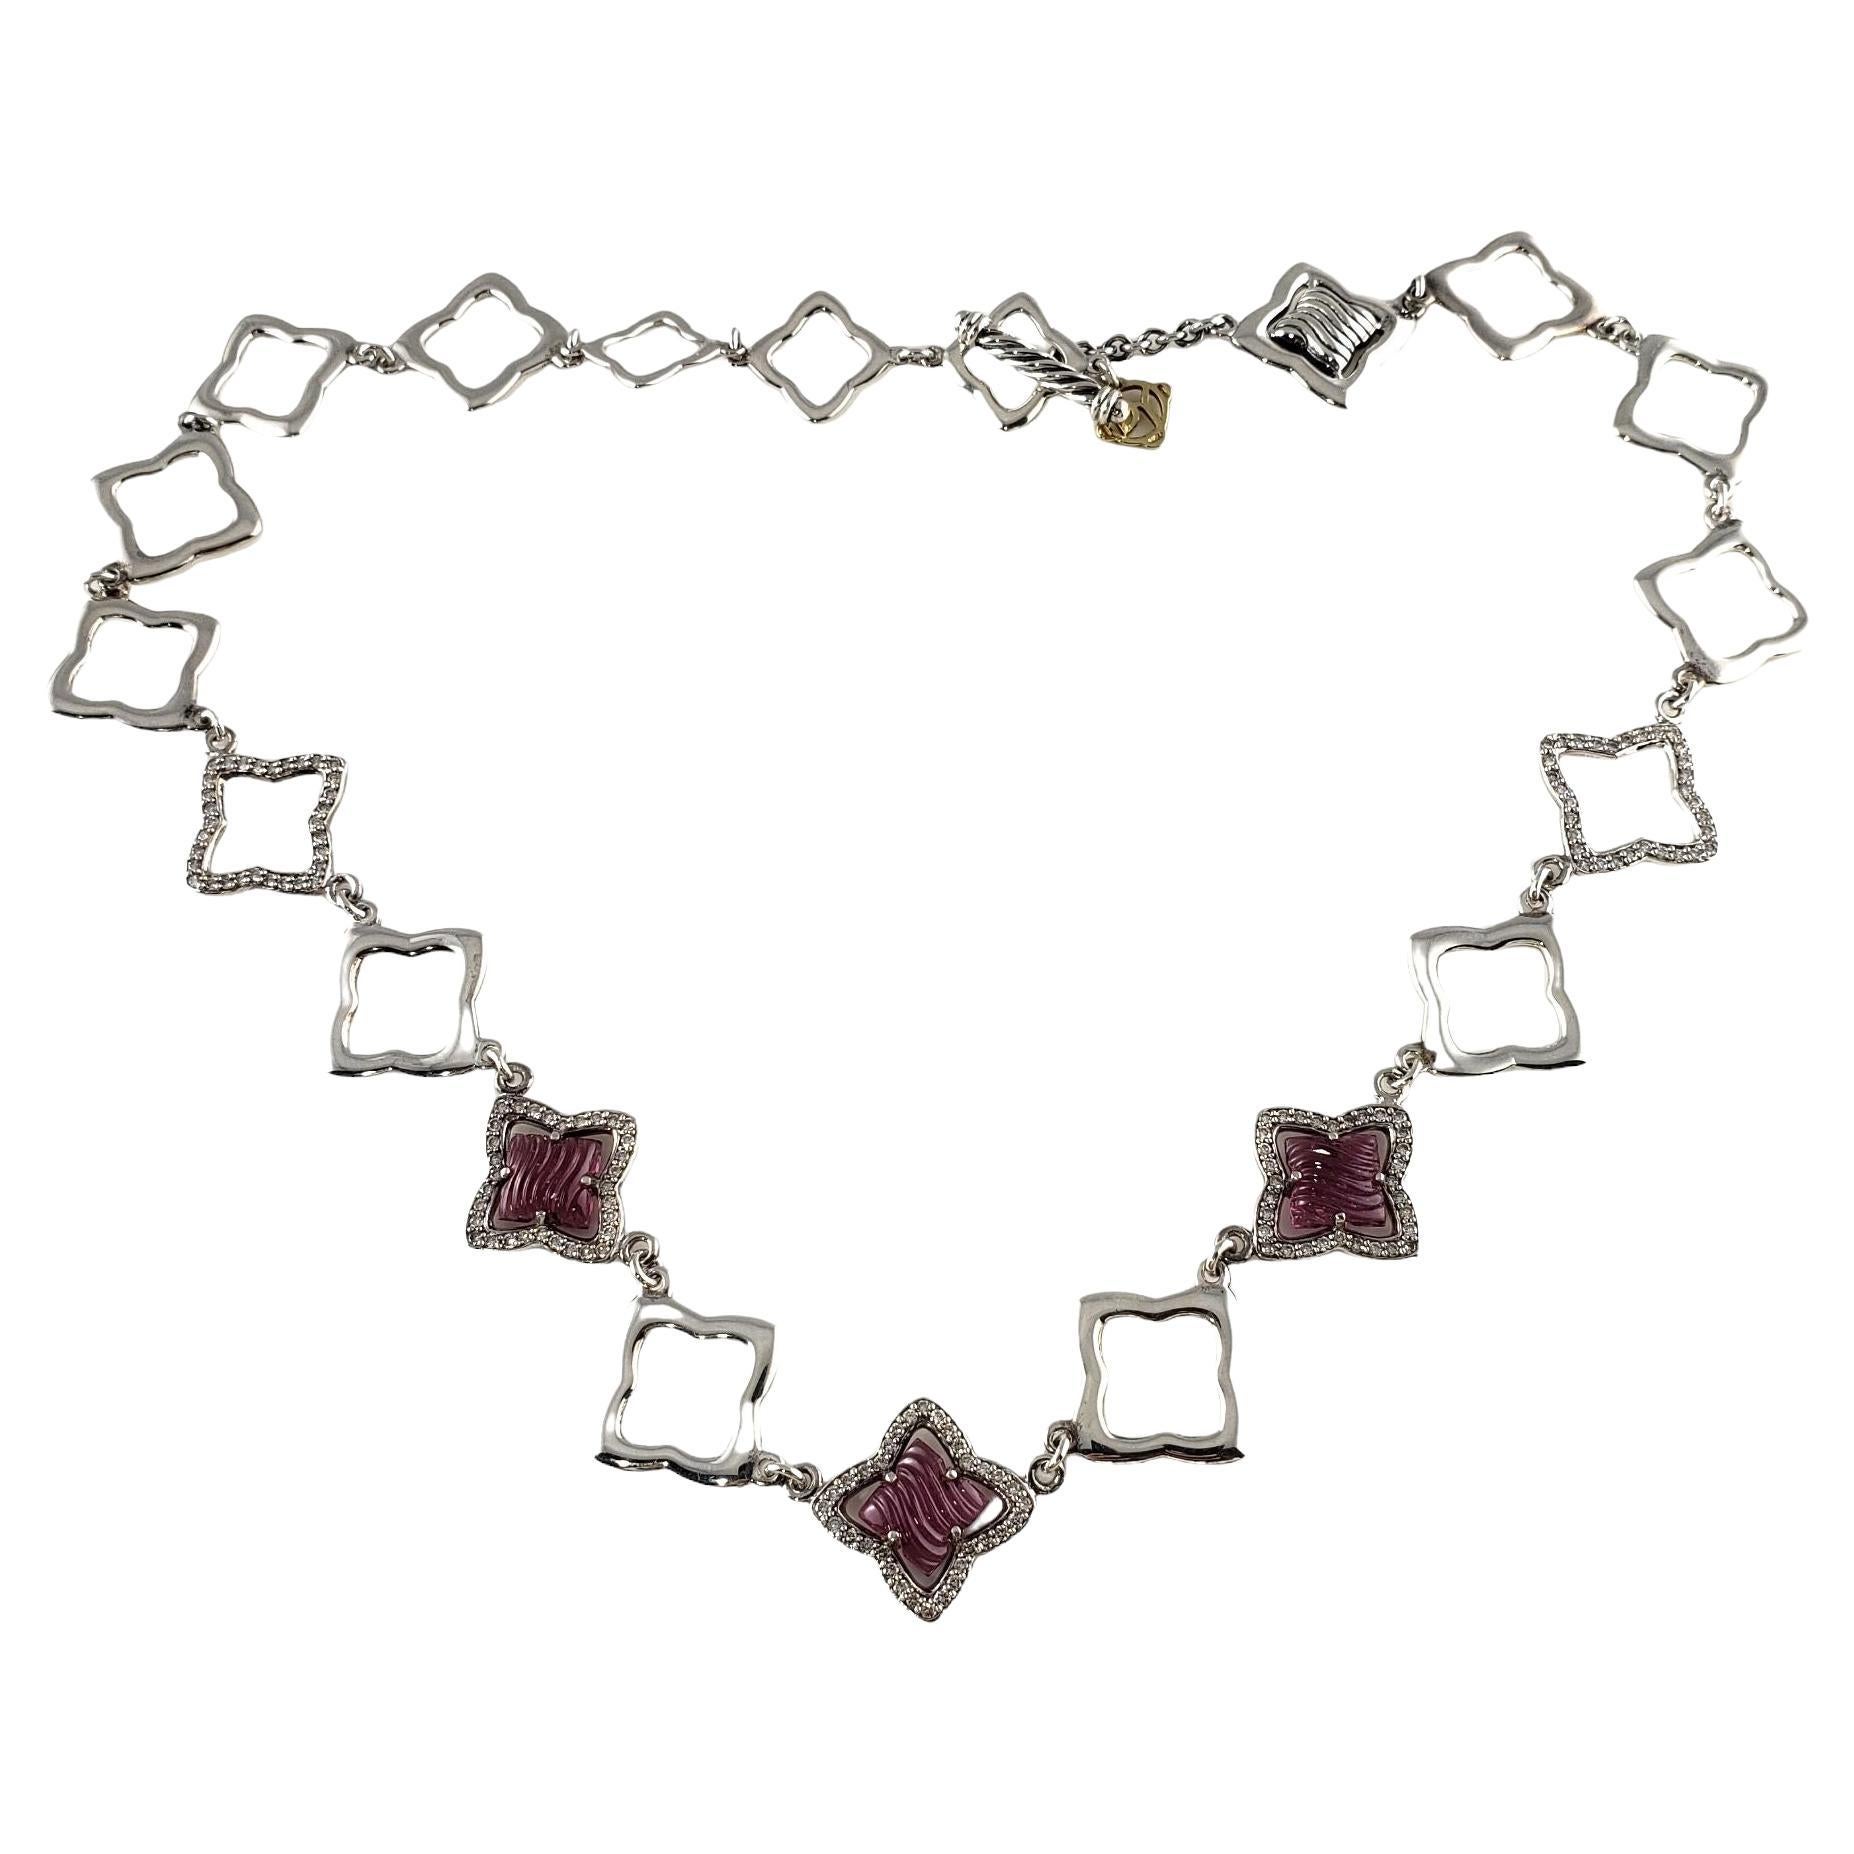 David Yurman Sterling Silver and 18K Yellow Gold Pink Tourmaline and Diamond Quatrefoil Necklace-

This elegant necklace by David Yurman is crafted in sterling silver with 18K yellow gold accents and beautifully set with pink tourmalines and 32